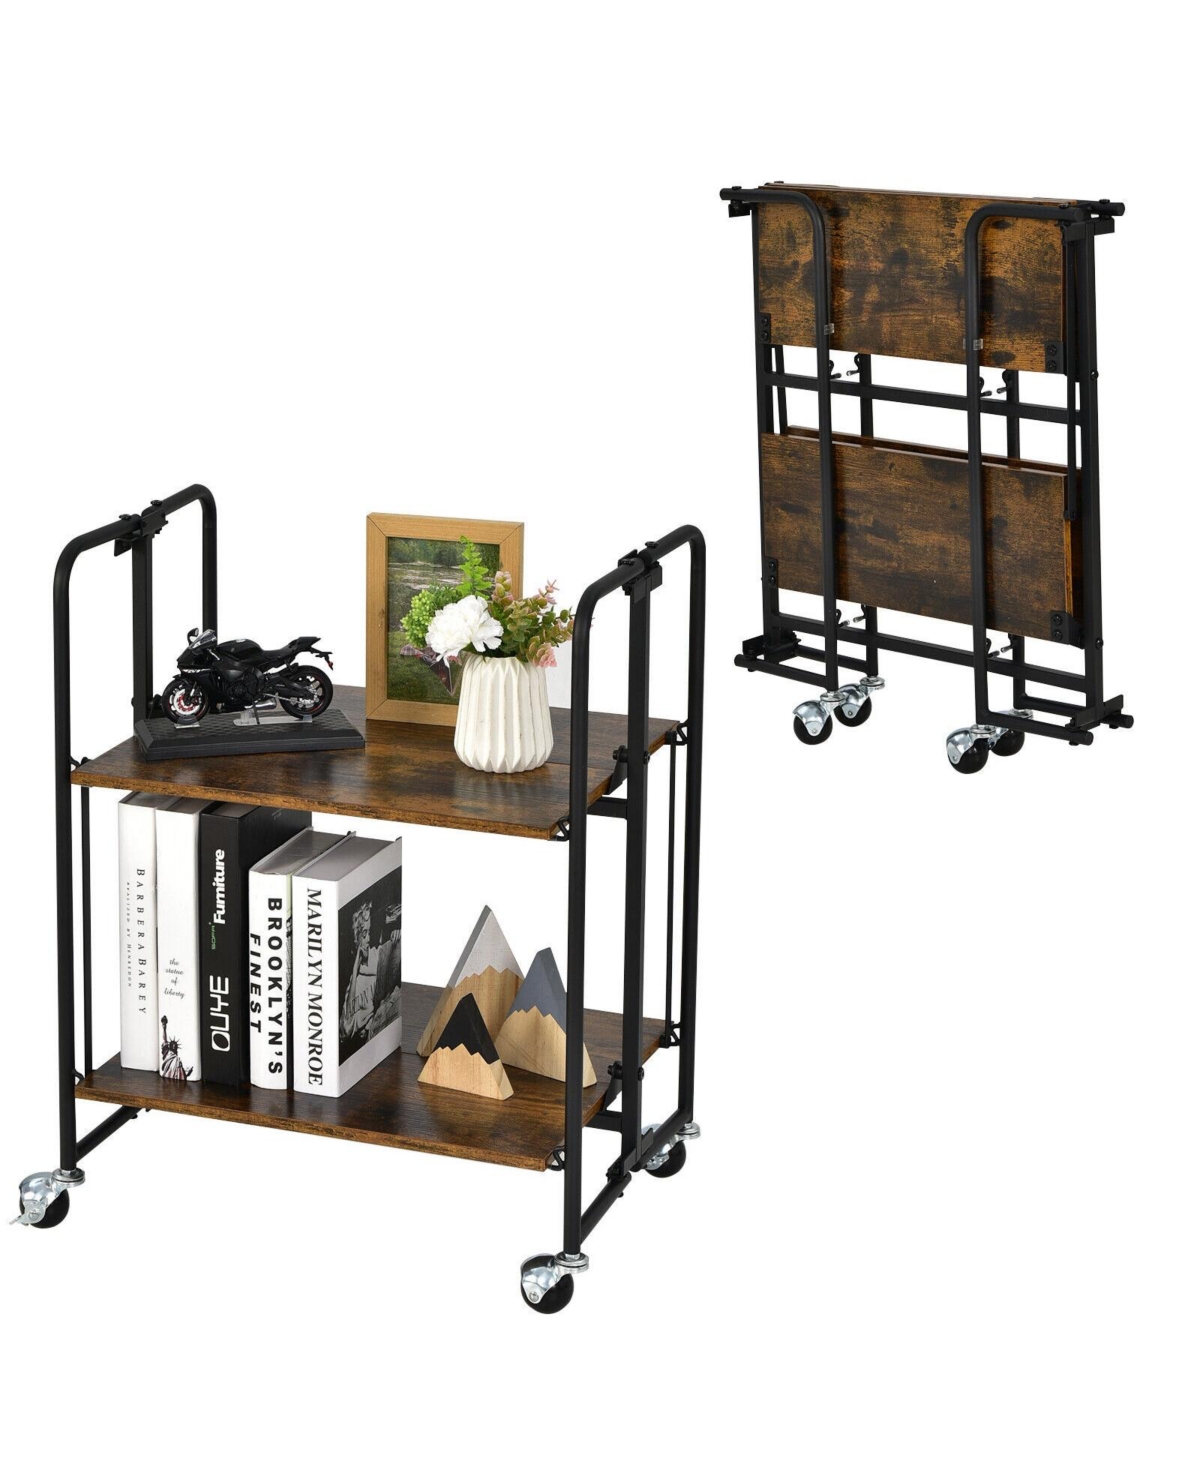 Foldable Rolling Cart with Storage Shelves for Kitchen - Brown